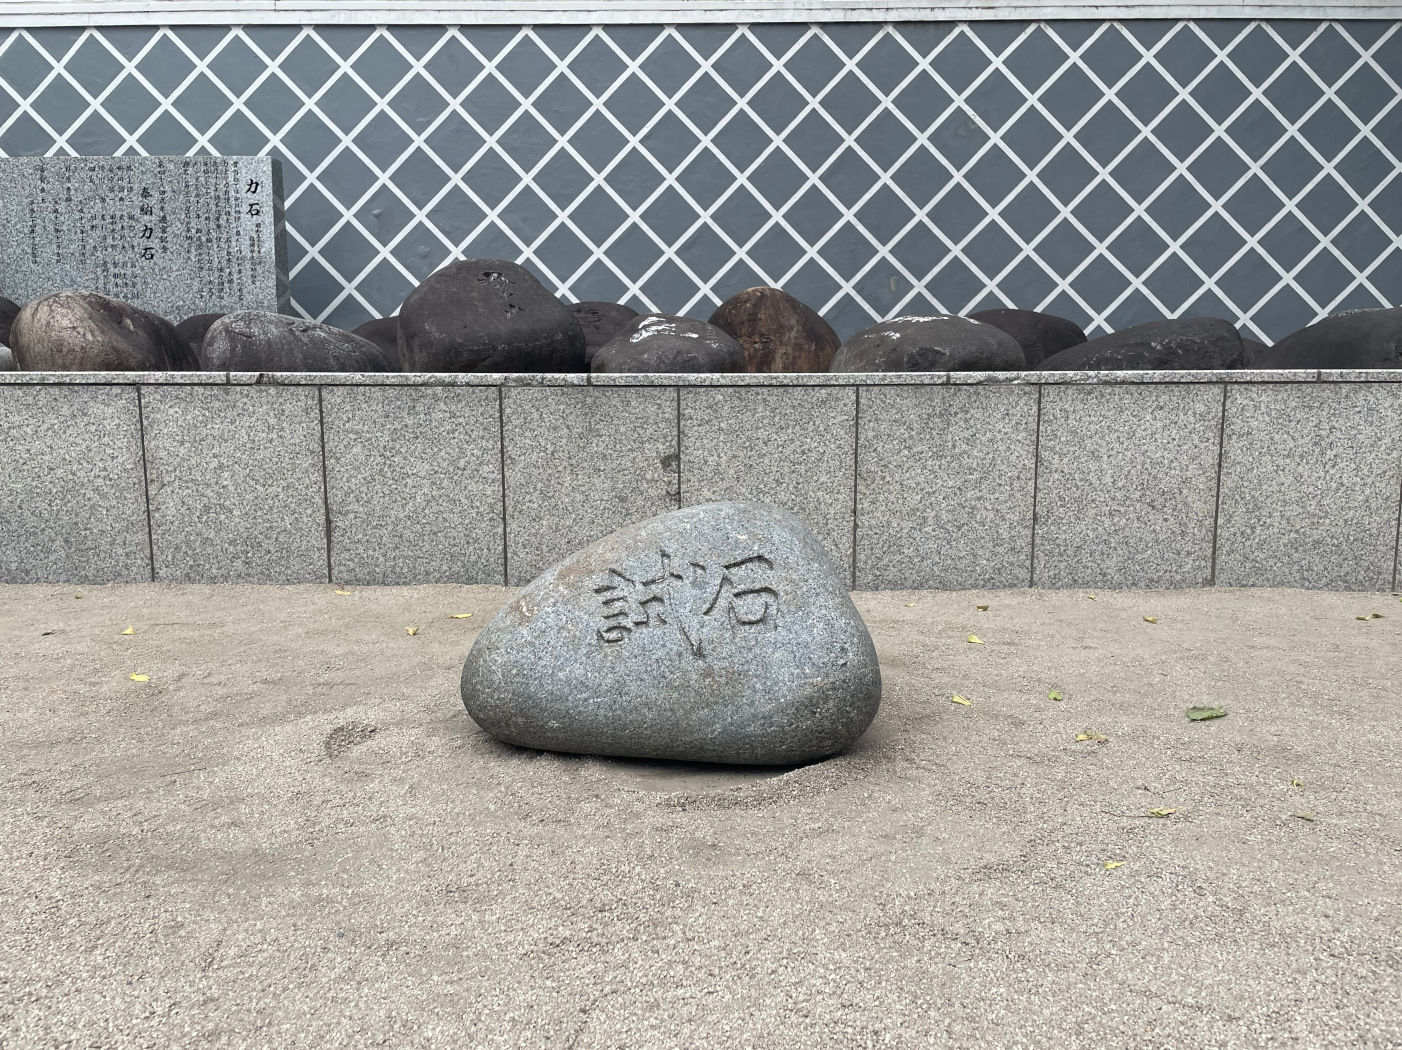 A close photo of Kushida Shrine's test stone on the gravel floor. On a platform in the background is the display of power stones.